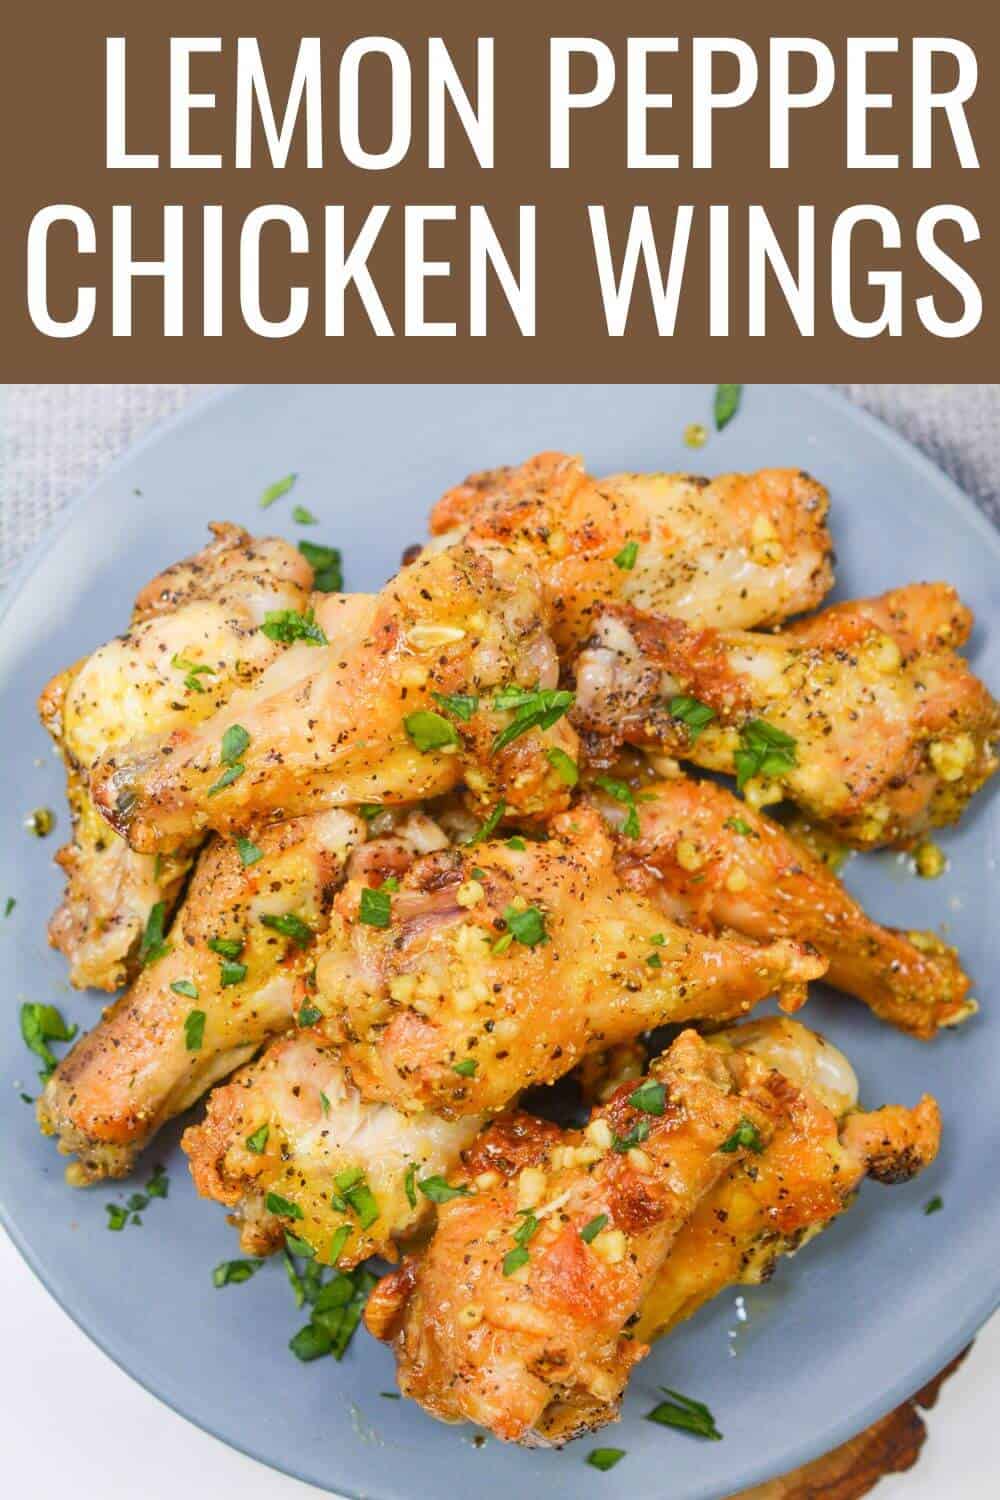 Lemon pepper wings with recipe title text overlay.